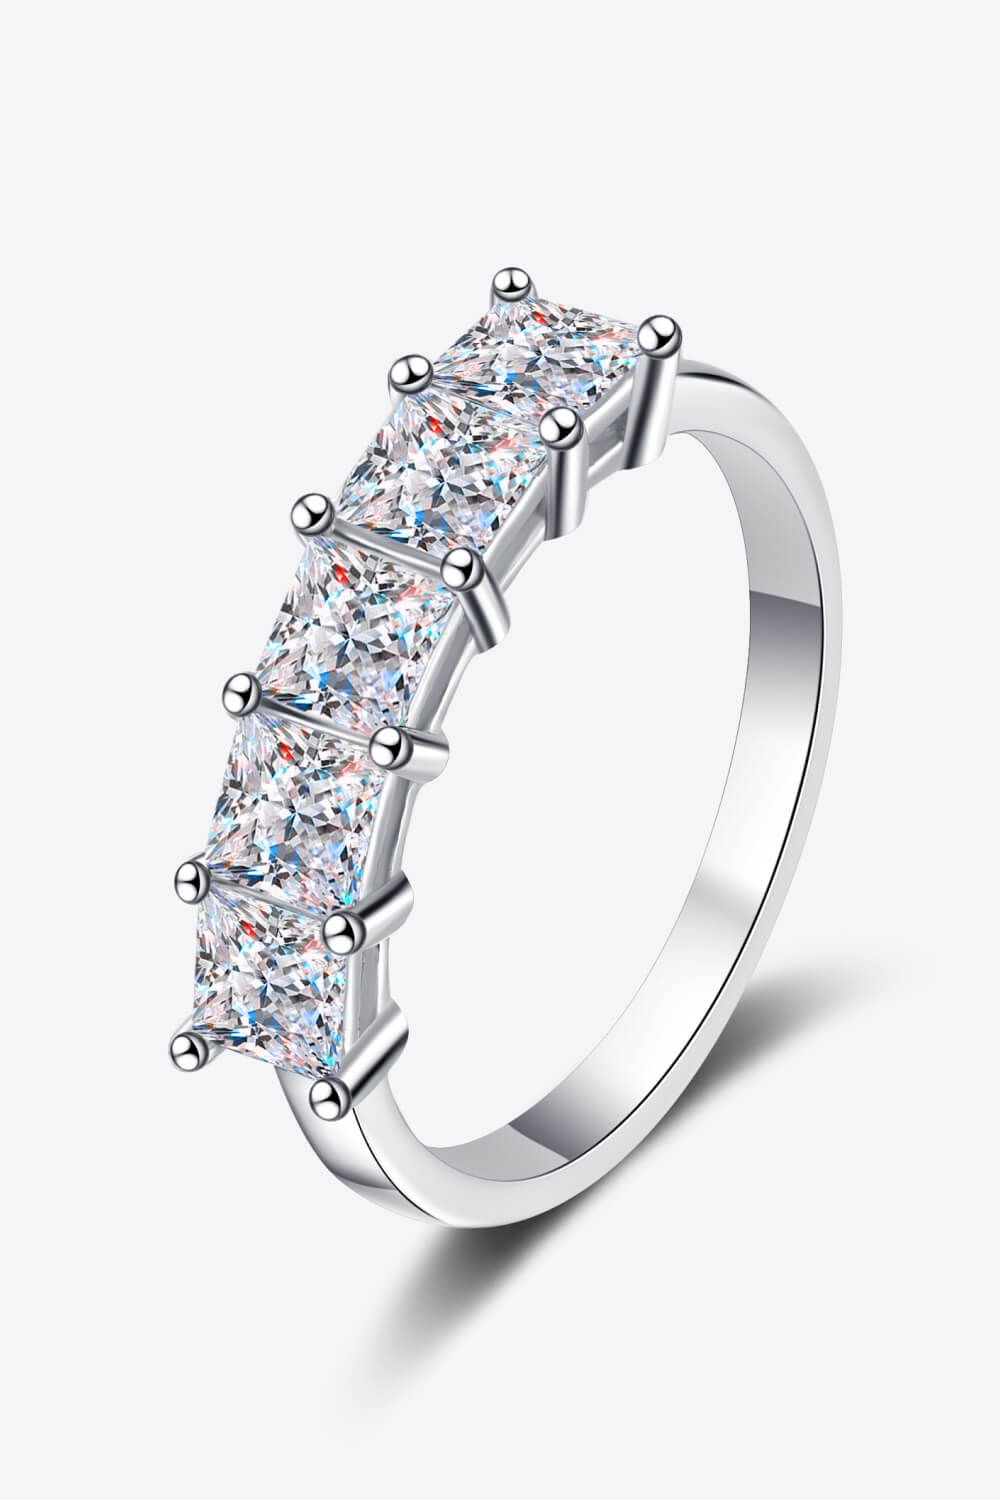 Romantic Surprise 2 Carat Moissanite Rhodium-Plated Ring-Rings-Inspired by Justeen-Women's Clothing Boutique in Chicago, Illinois